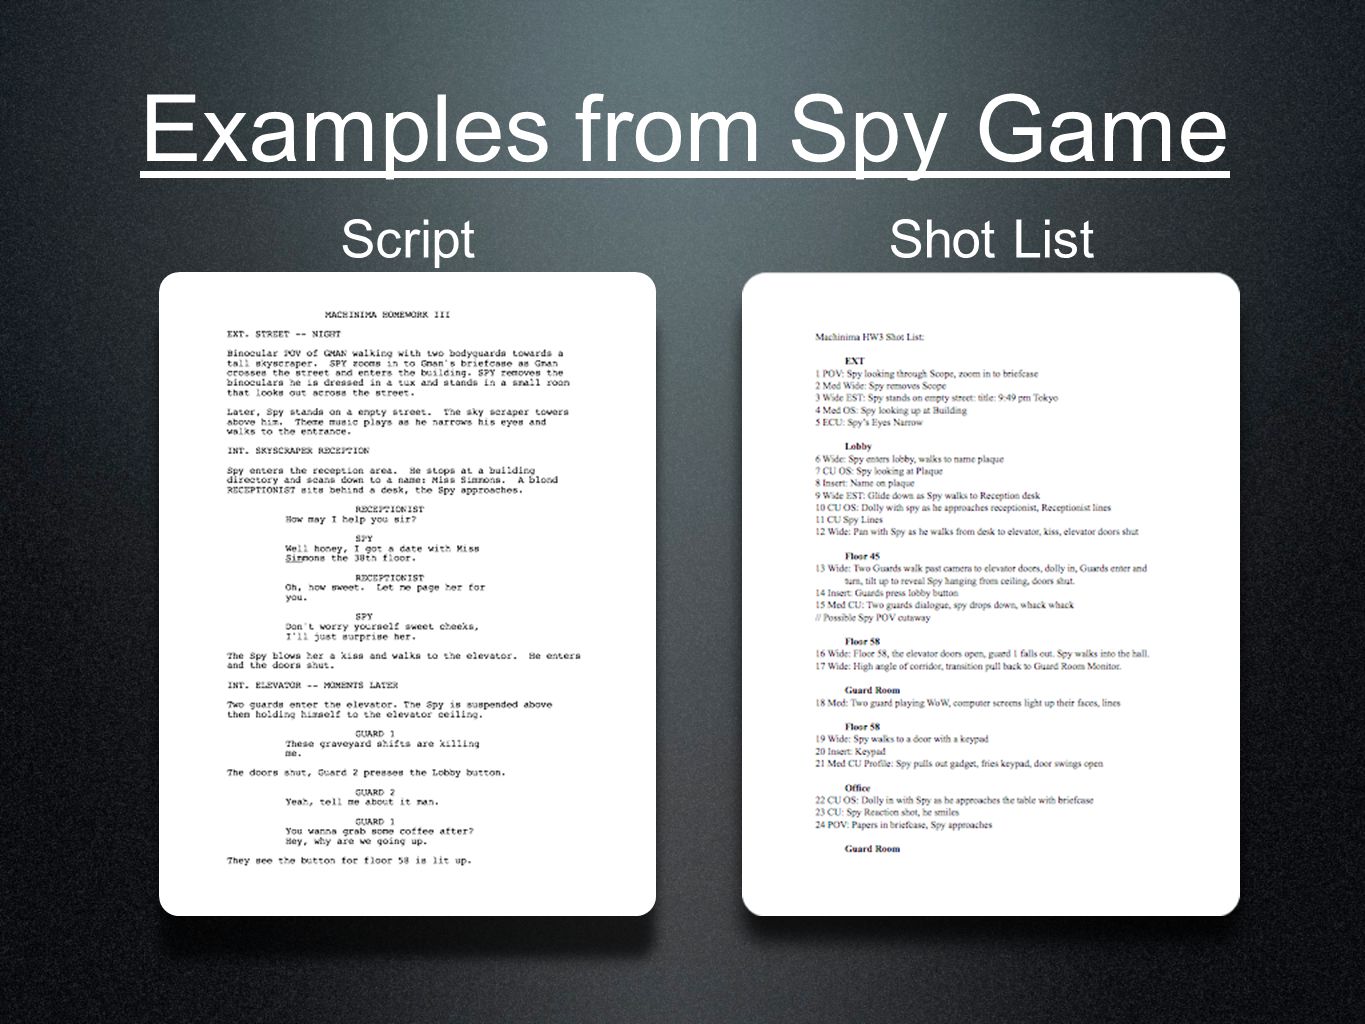 Examples from Spy Game ScriptShot List